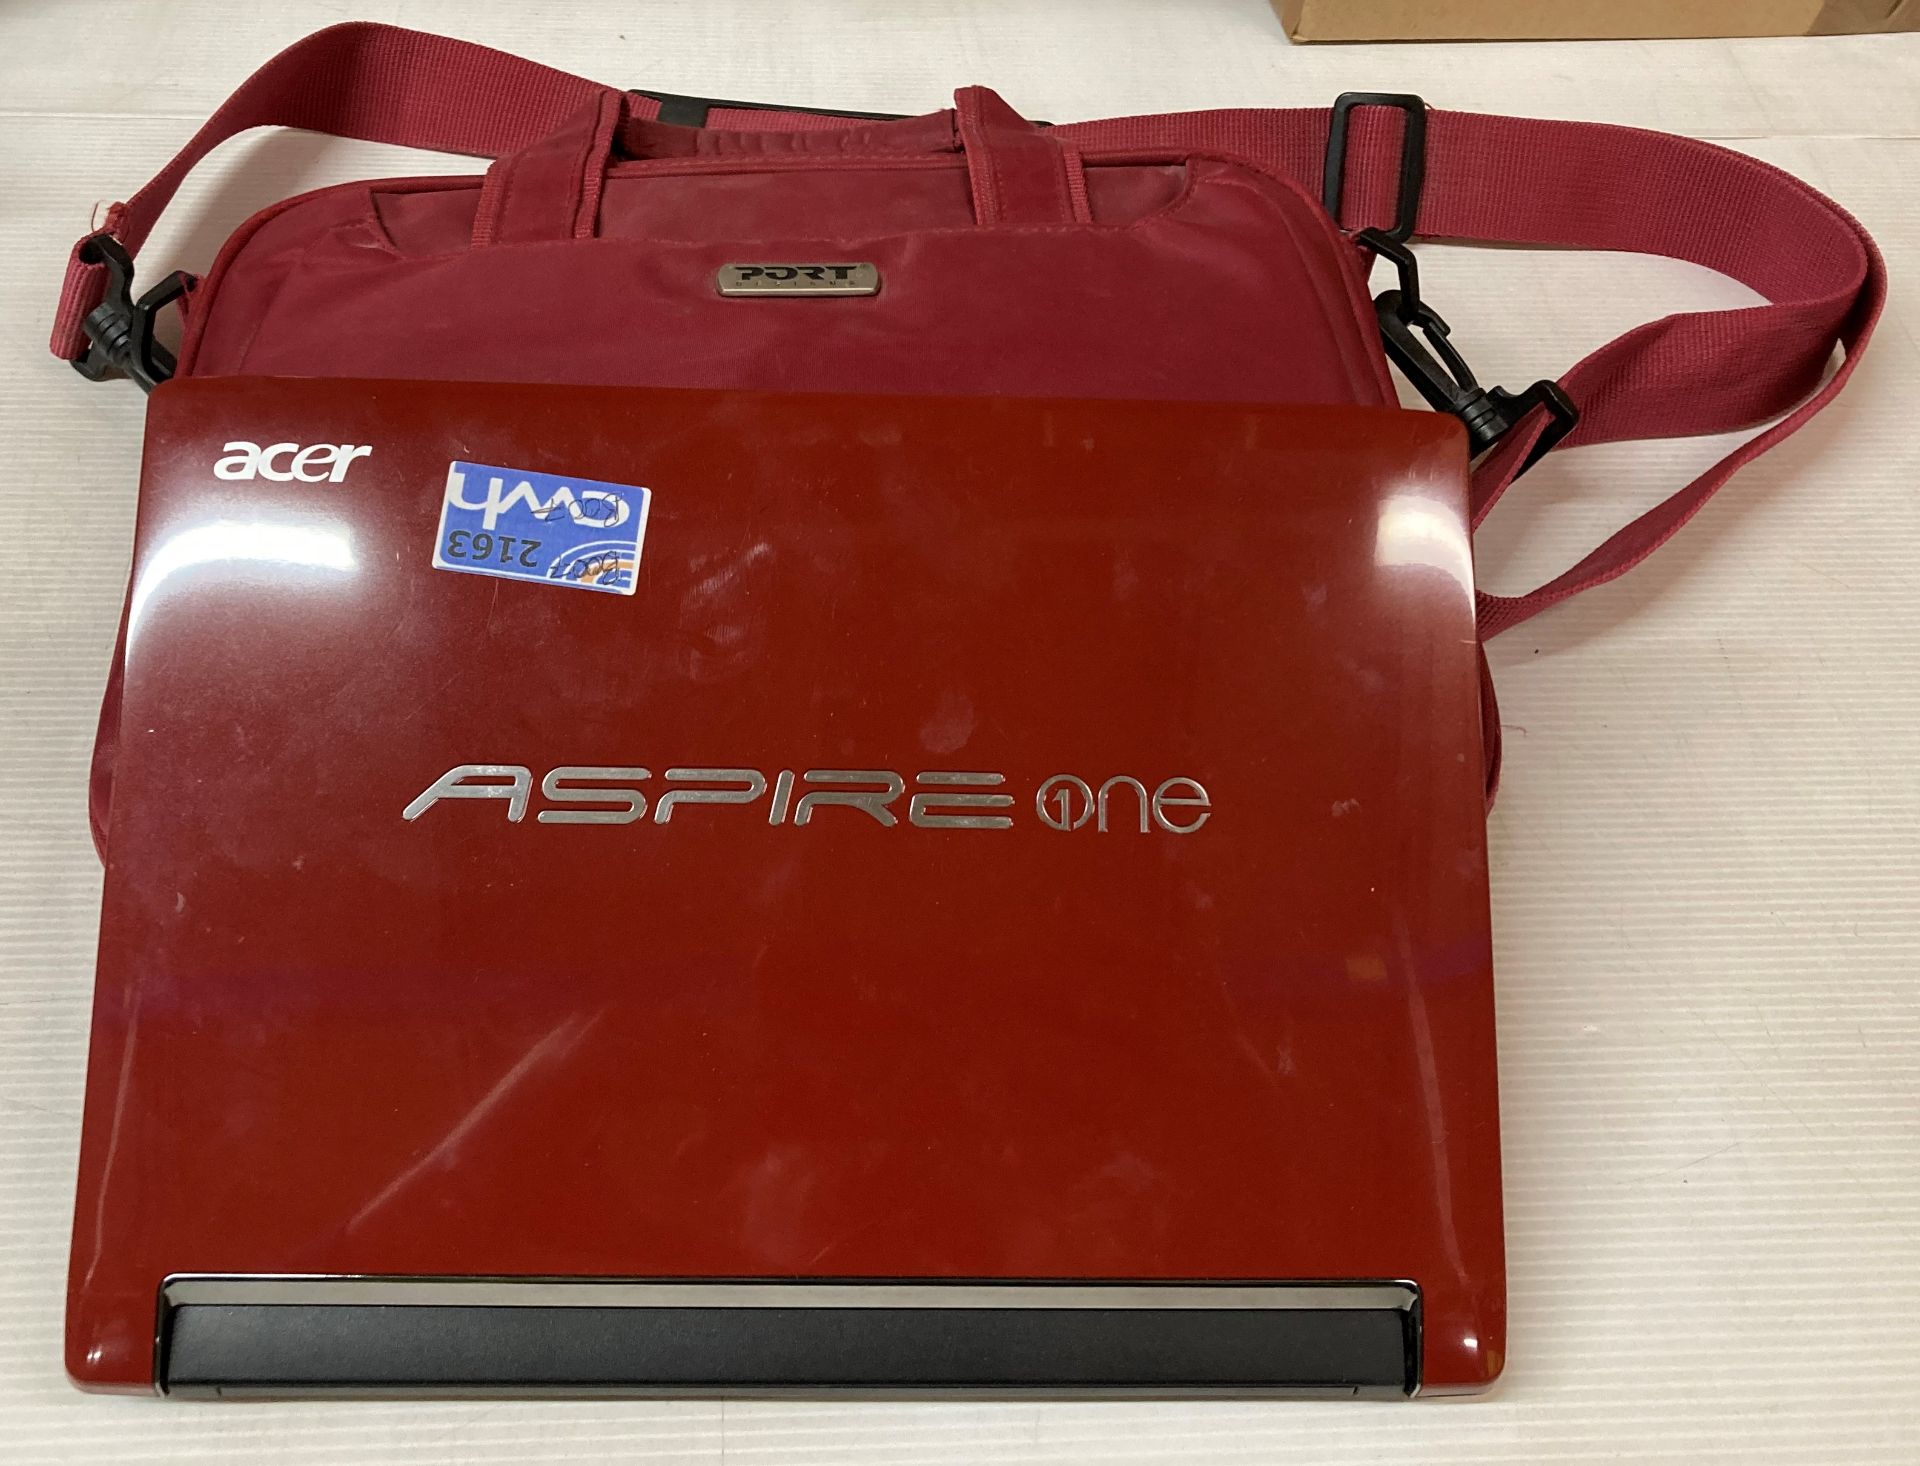 Acer Aspire One LAPTOP Intel Atom 1GB RAM 250GB HD - complete with carry case (M12)